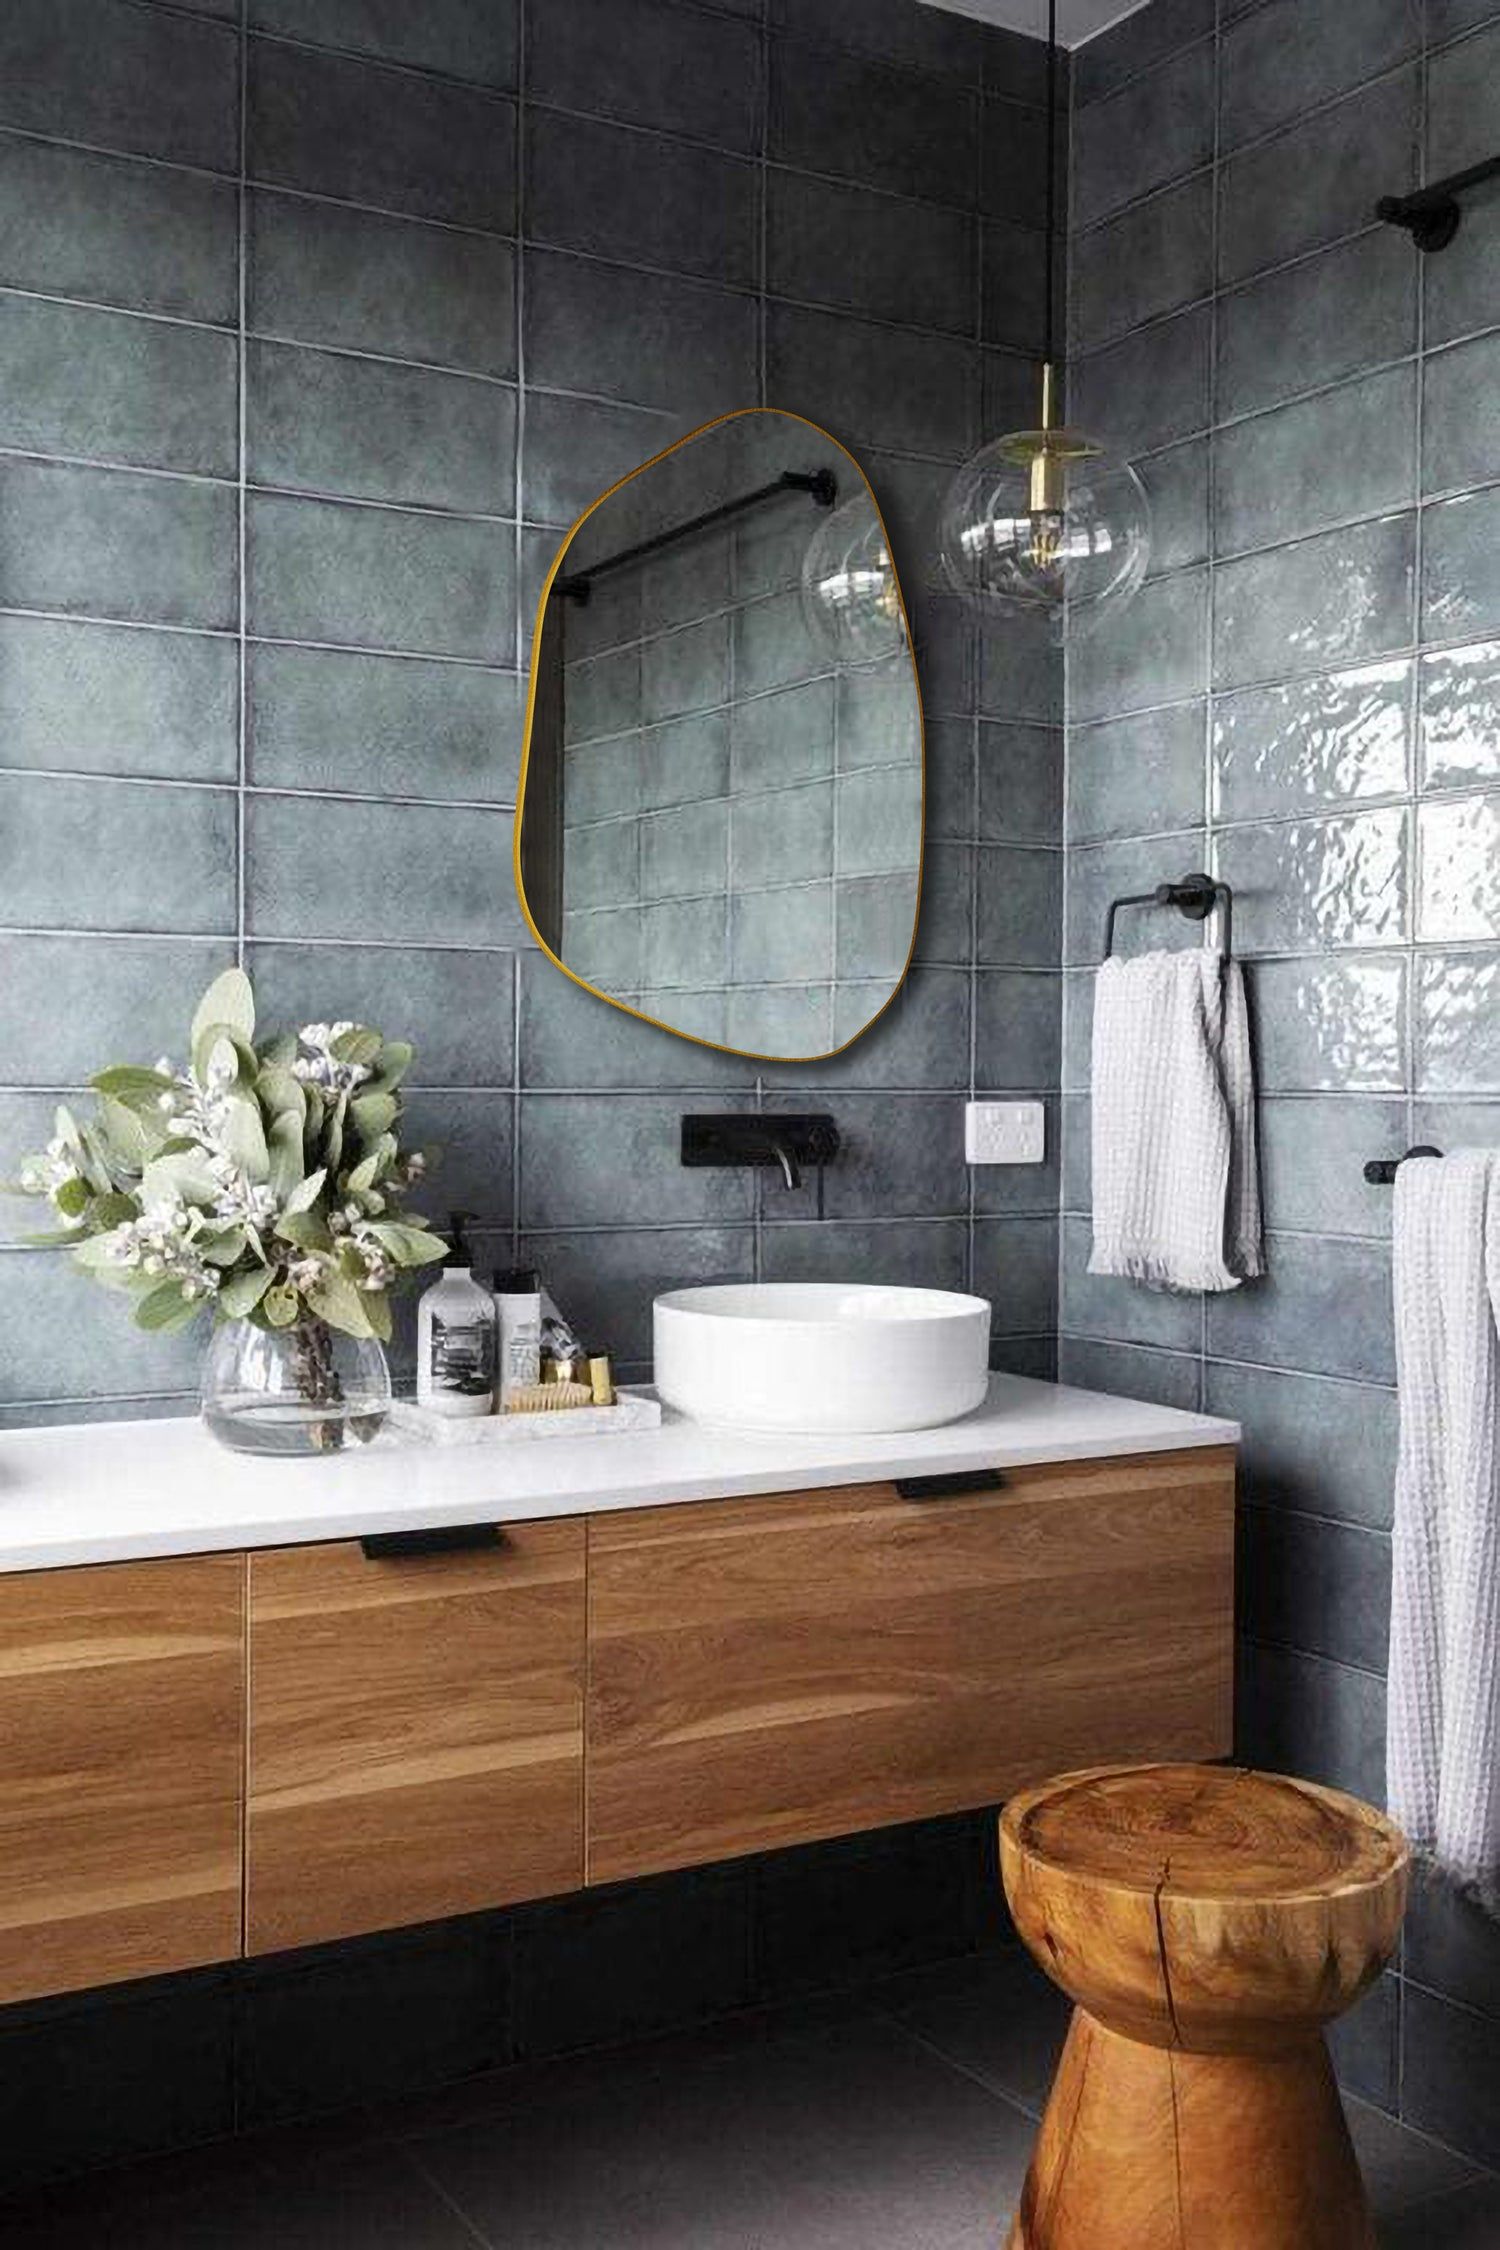 Get the beautiful mirrors for bathrooms
with stunning frame